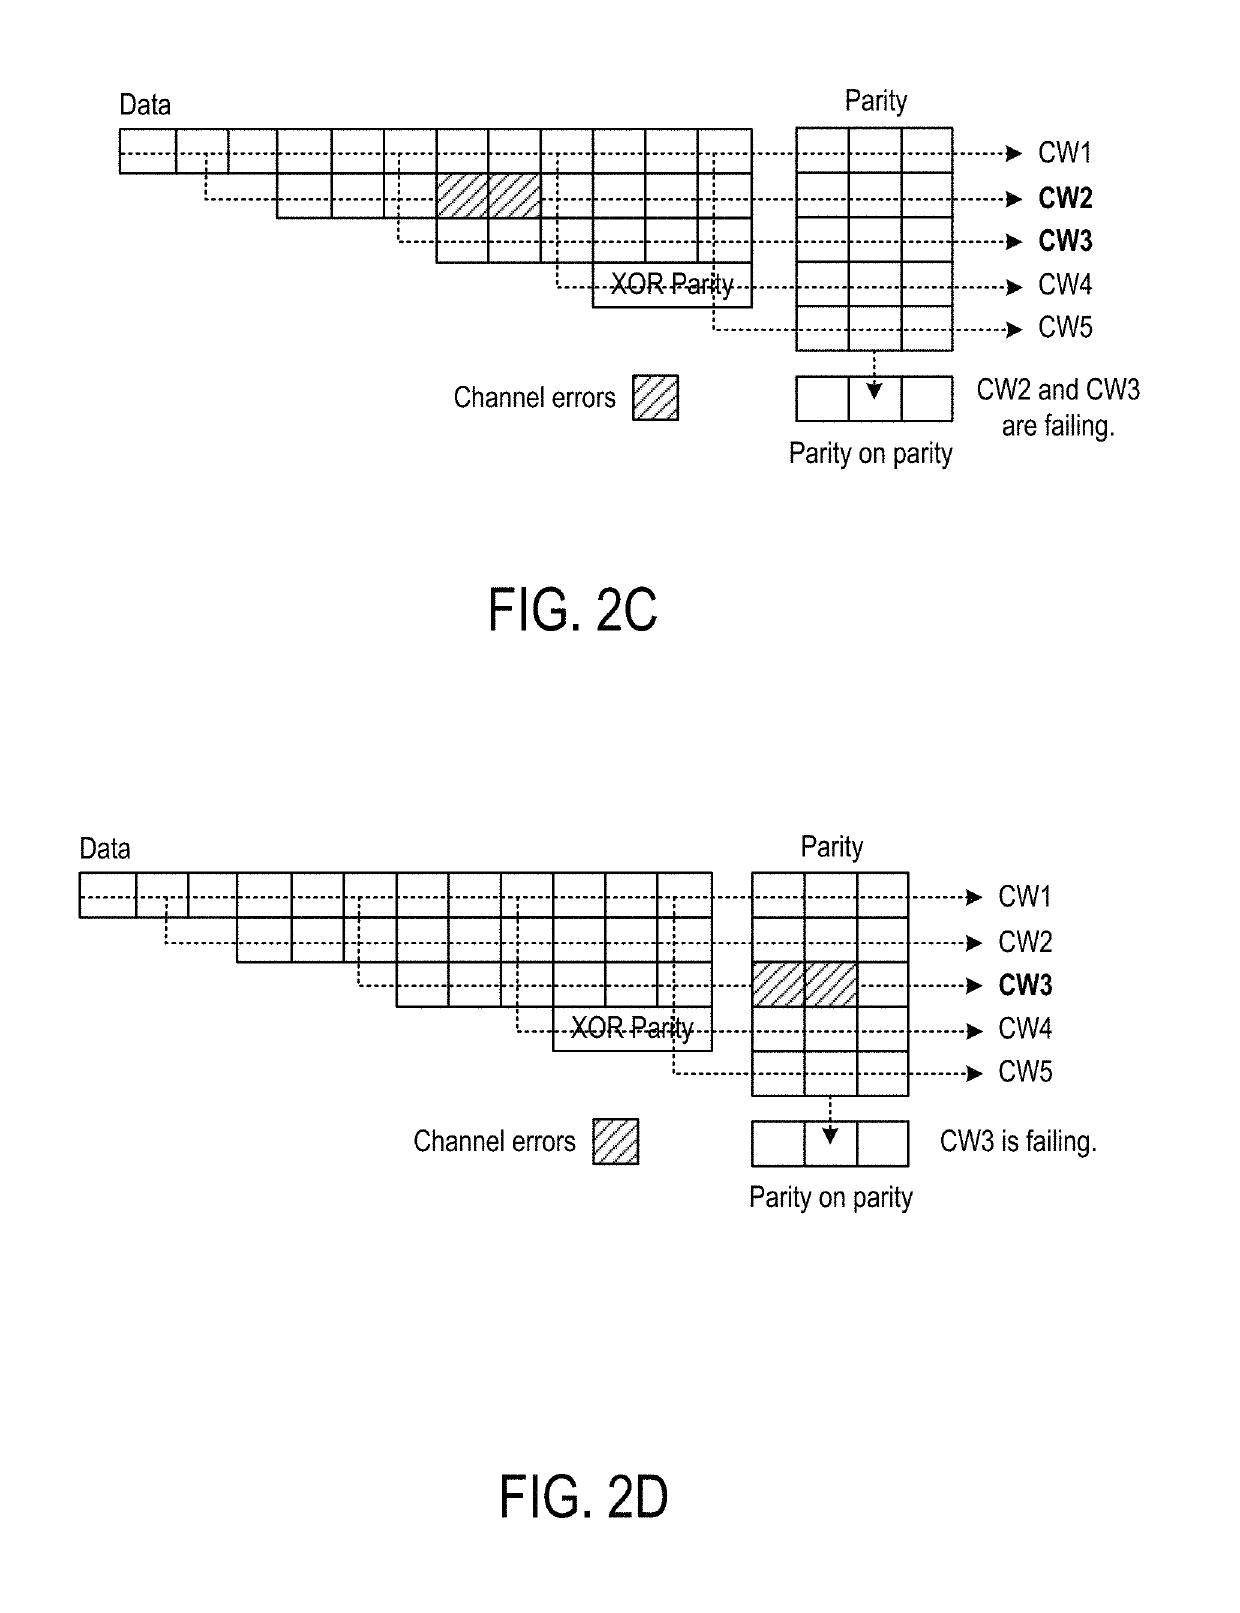 Data dependency mitigation in parallel decoders for flash storage